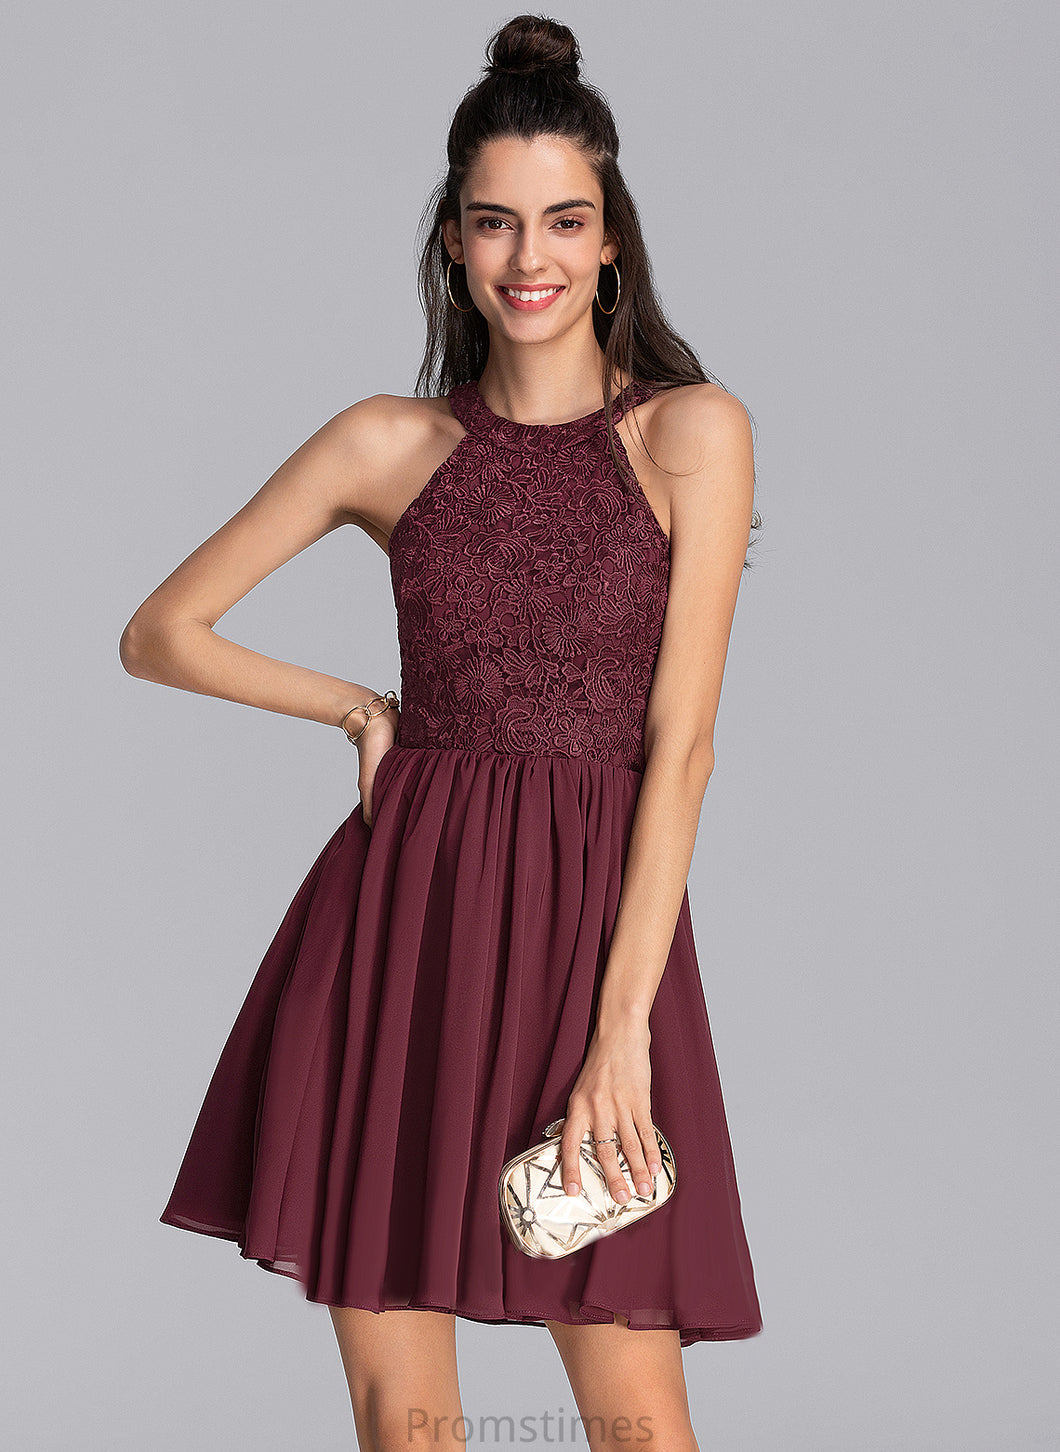 With Chiffon Mylee Homecoming A-Line Lace Short/Mini Neck Homecoming Dresses Scoop Dress